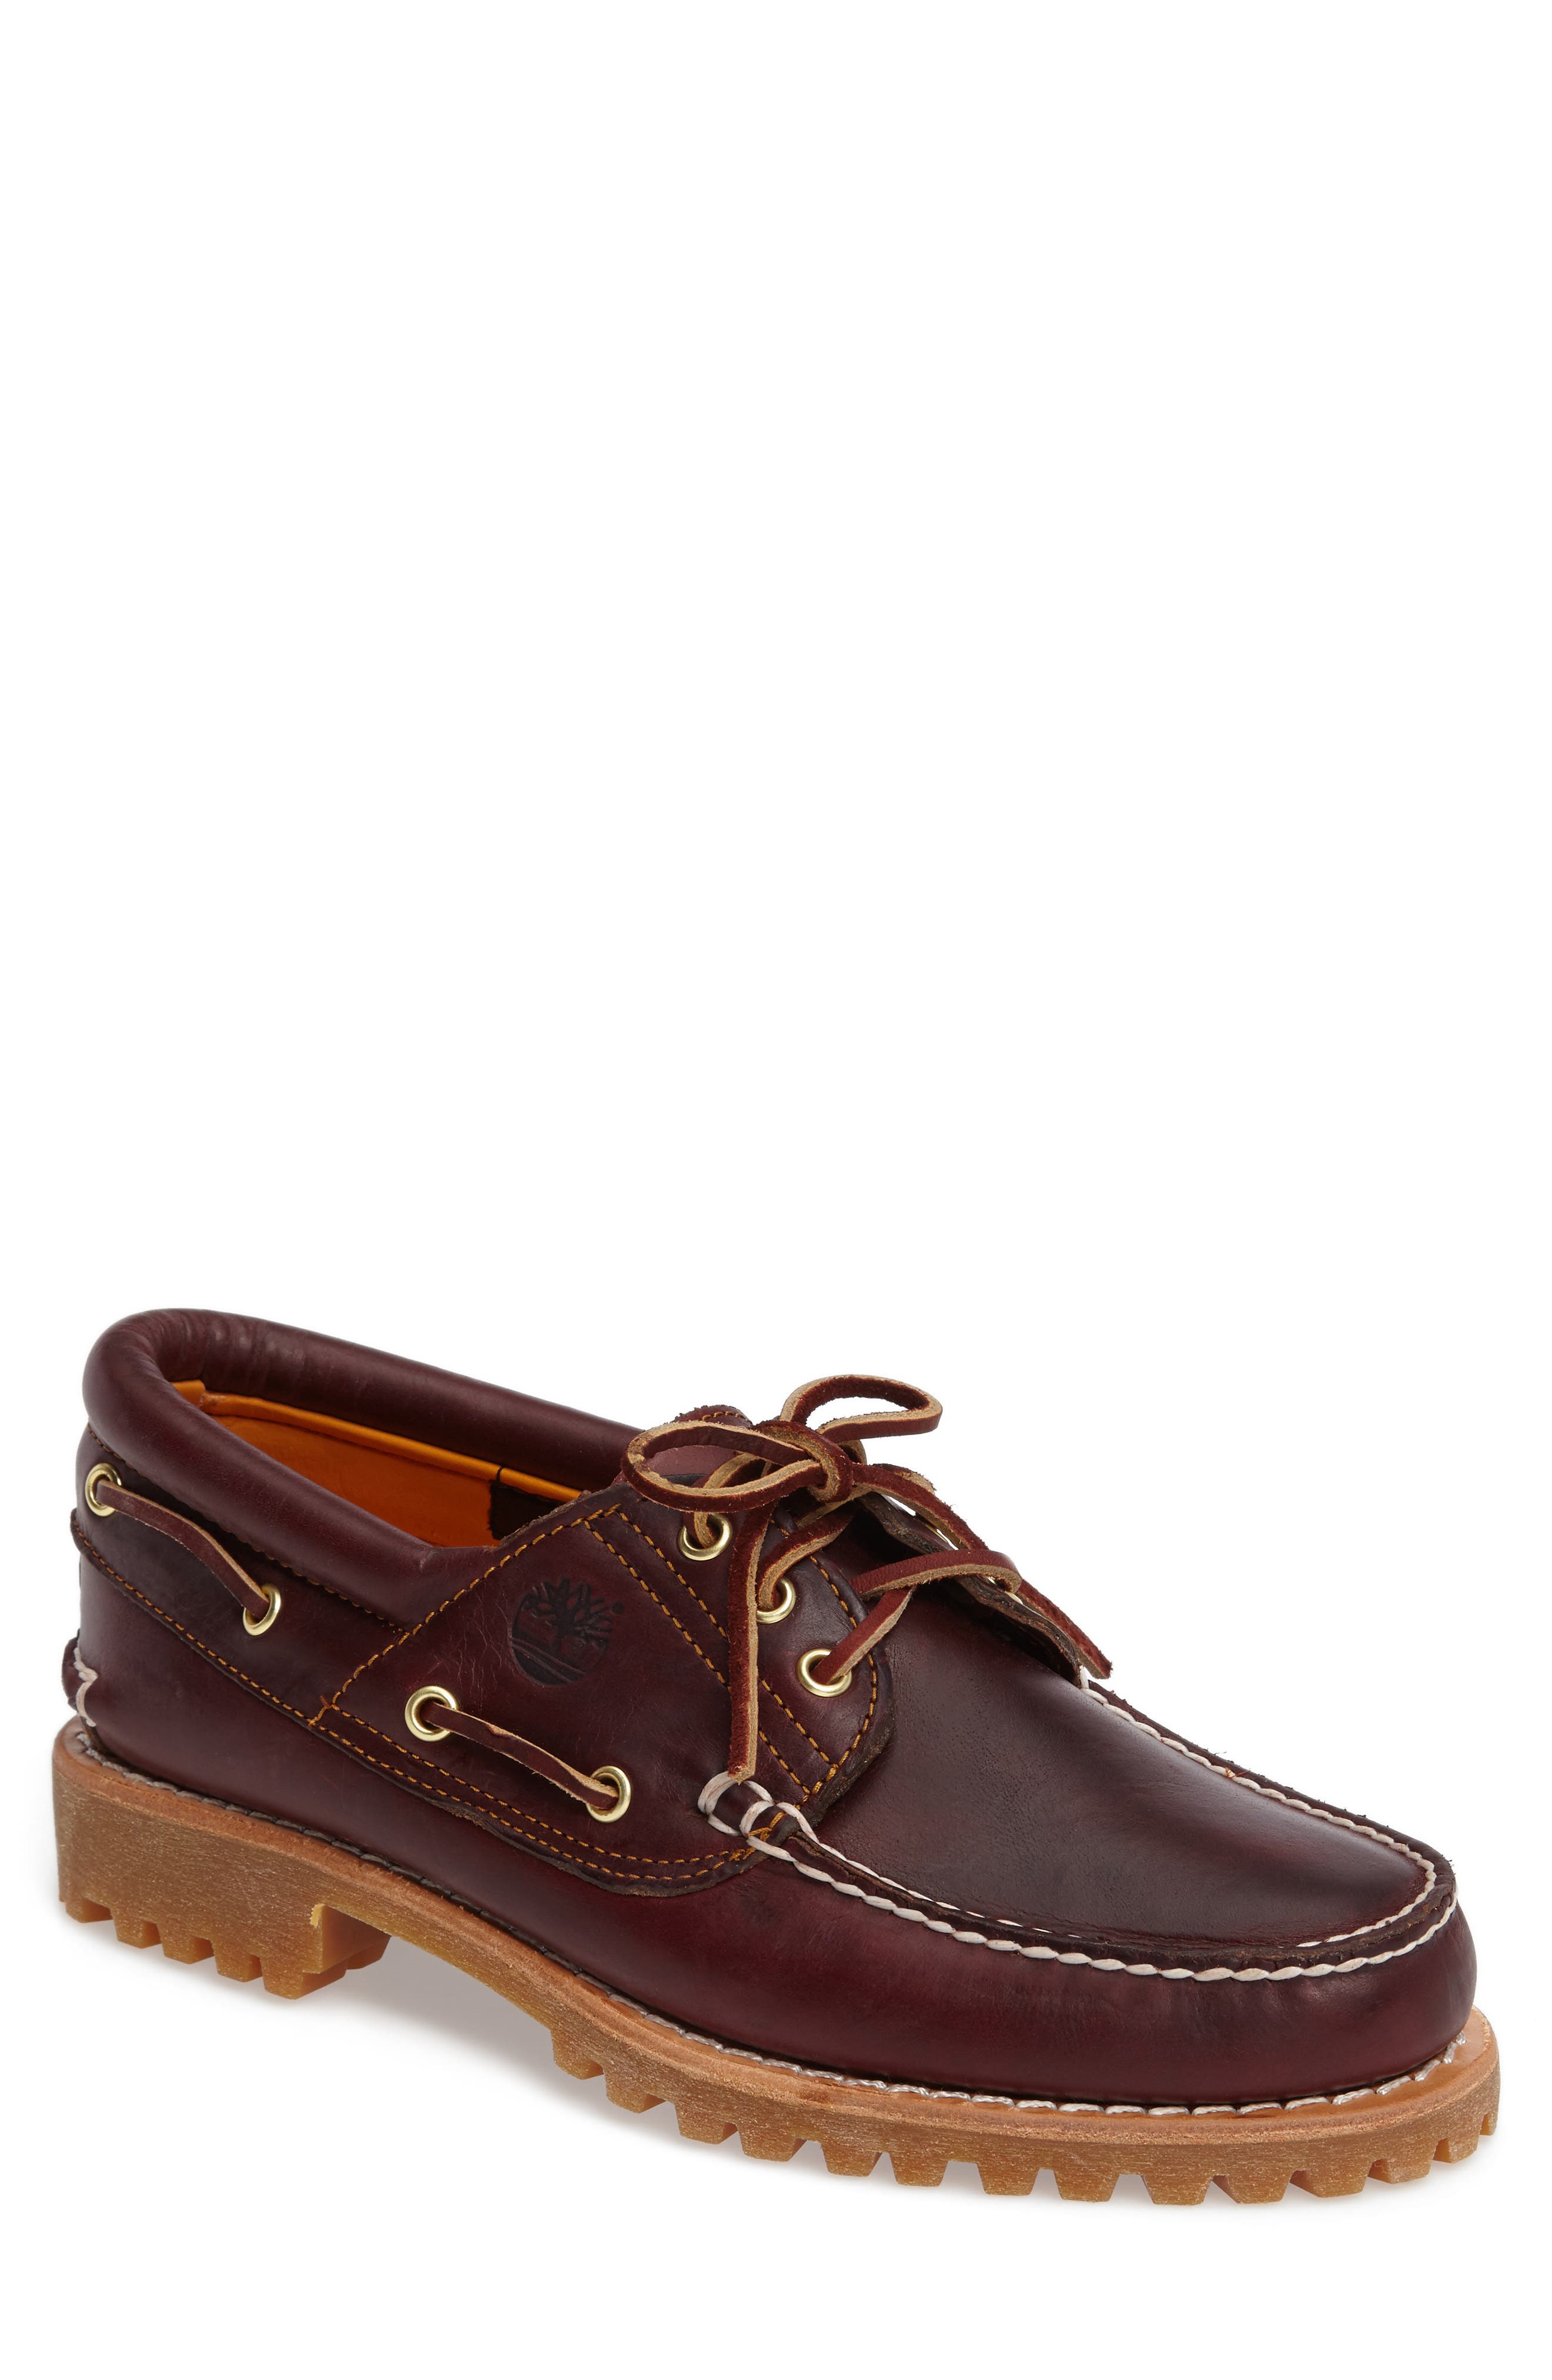 Timberland Authentic Boat Shoe (Men 